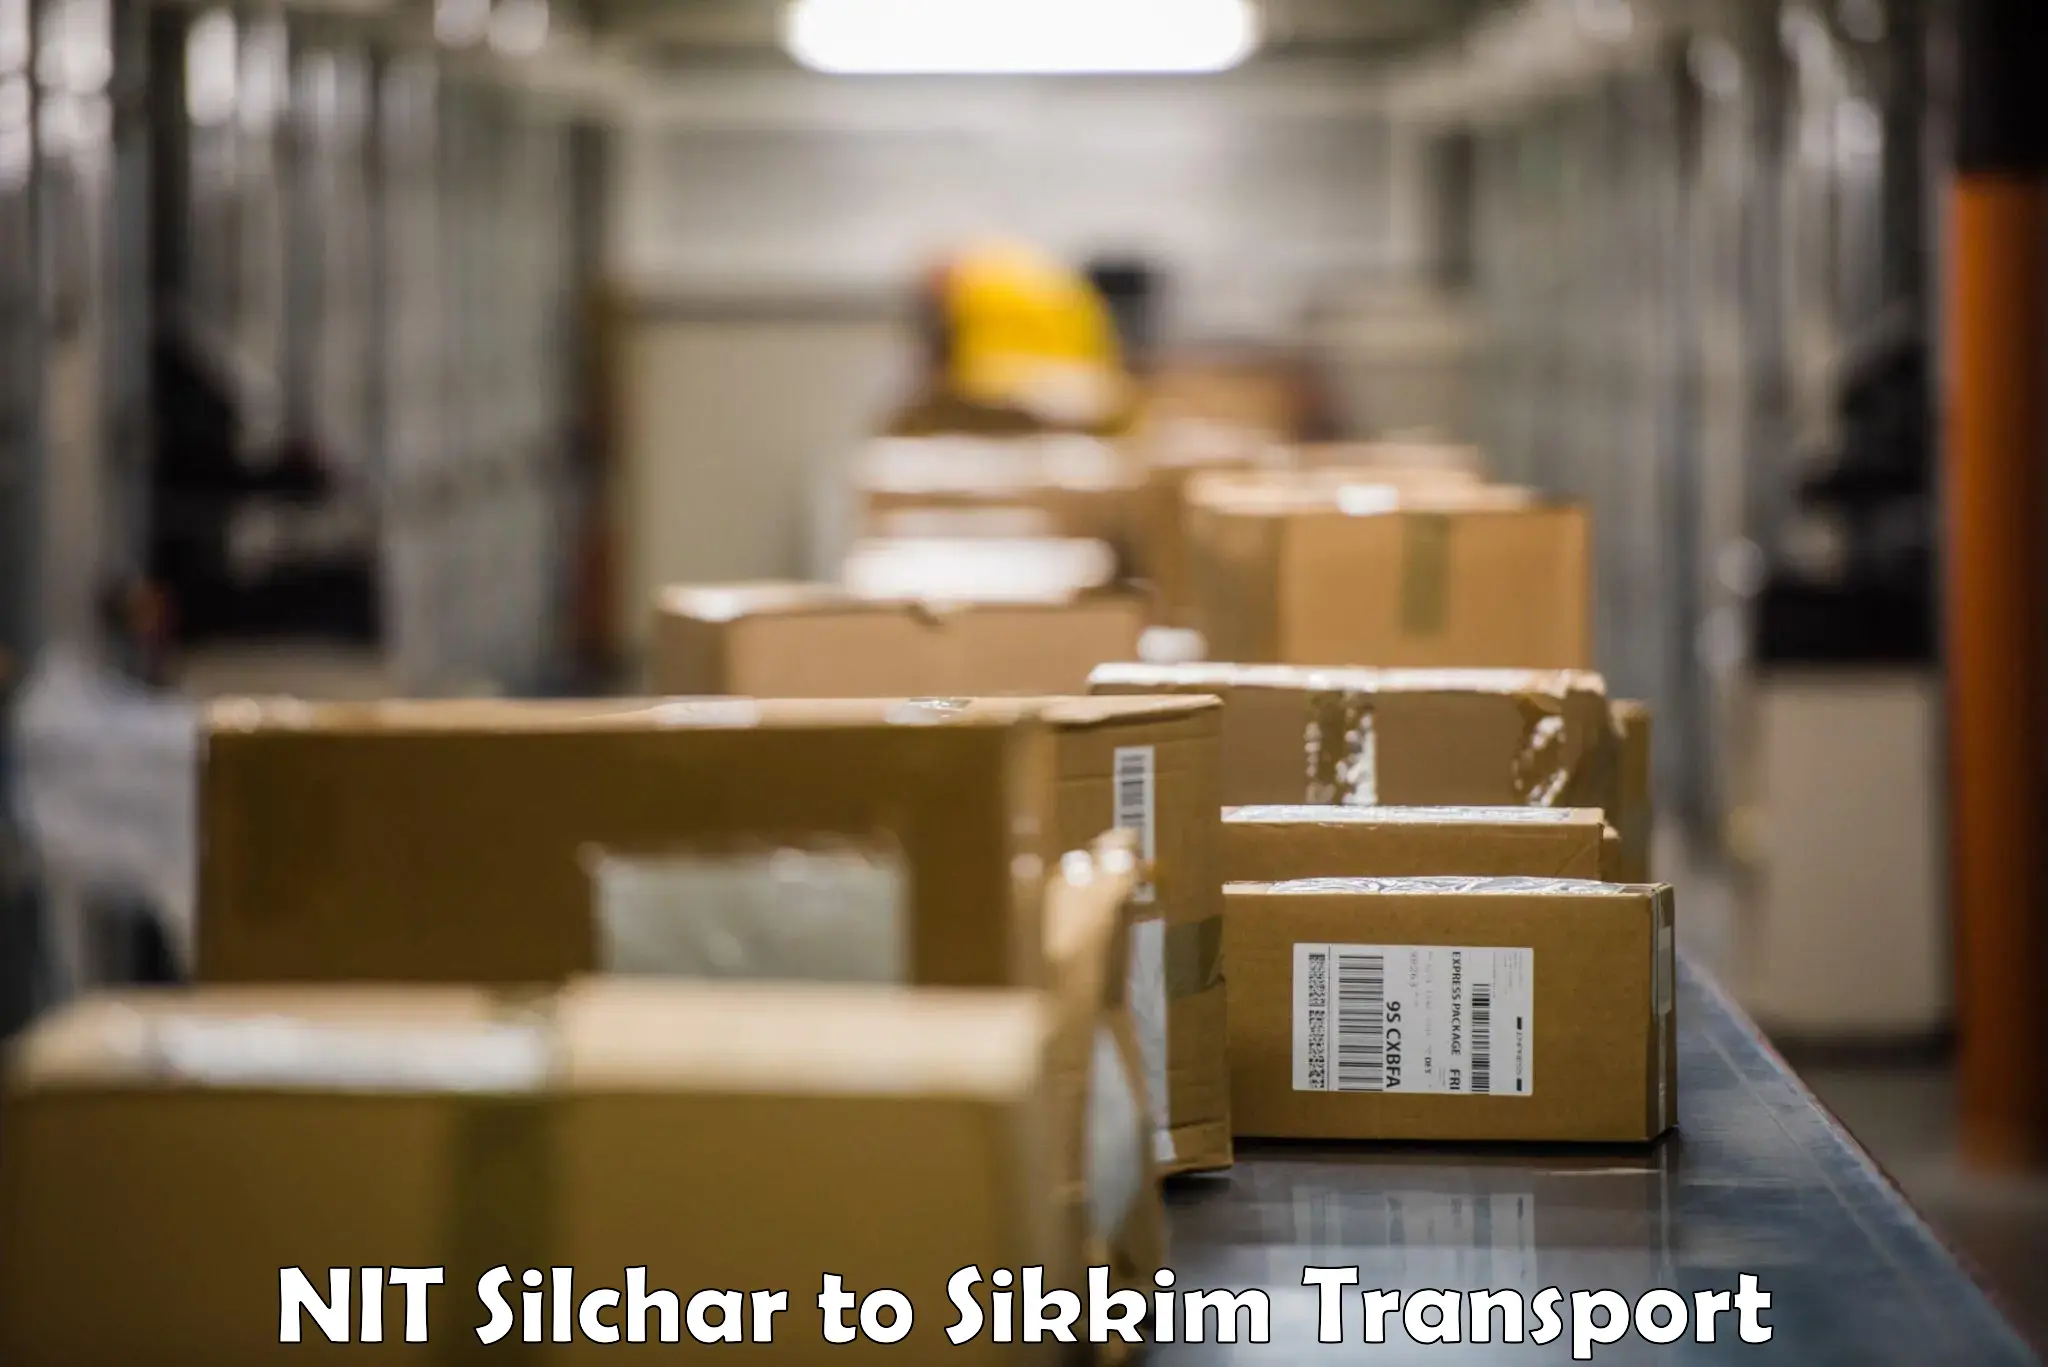 Transportation solution services NIT Silchar to East Sikkim